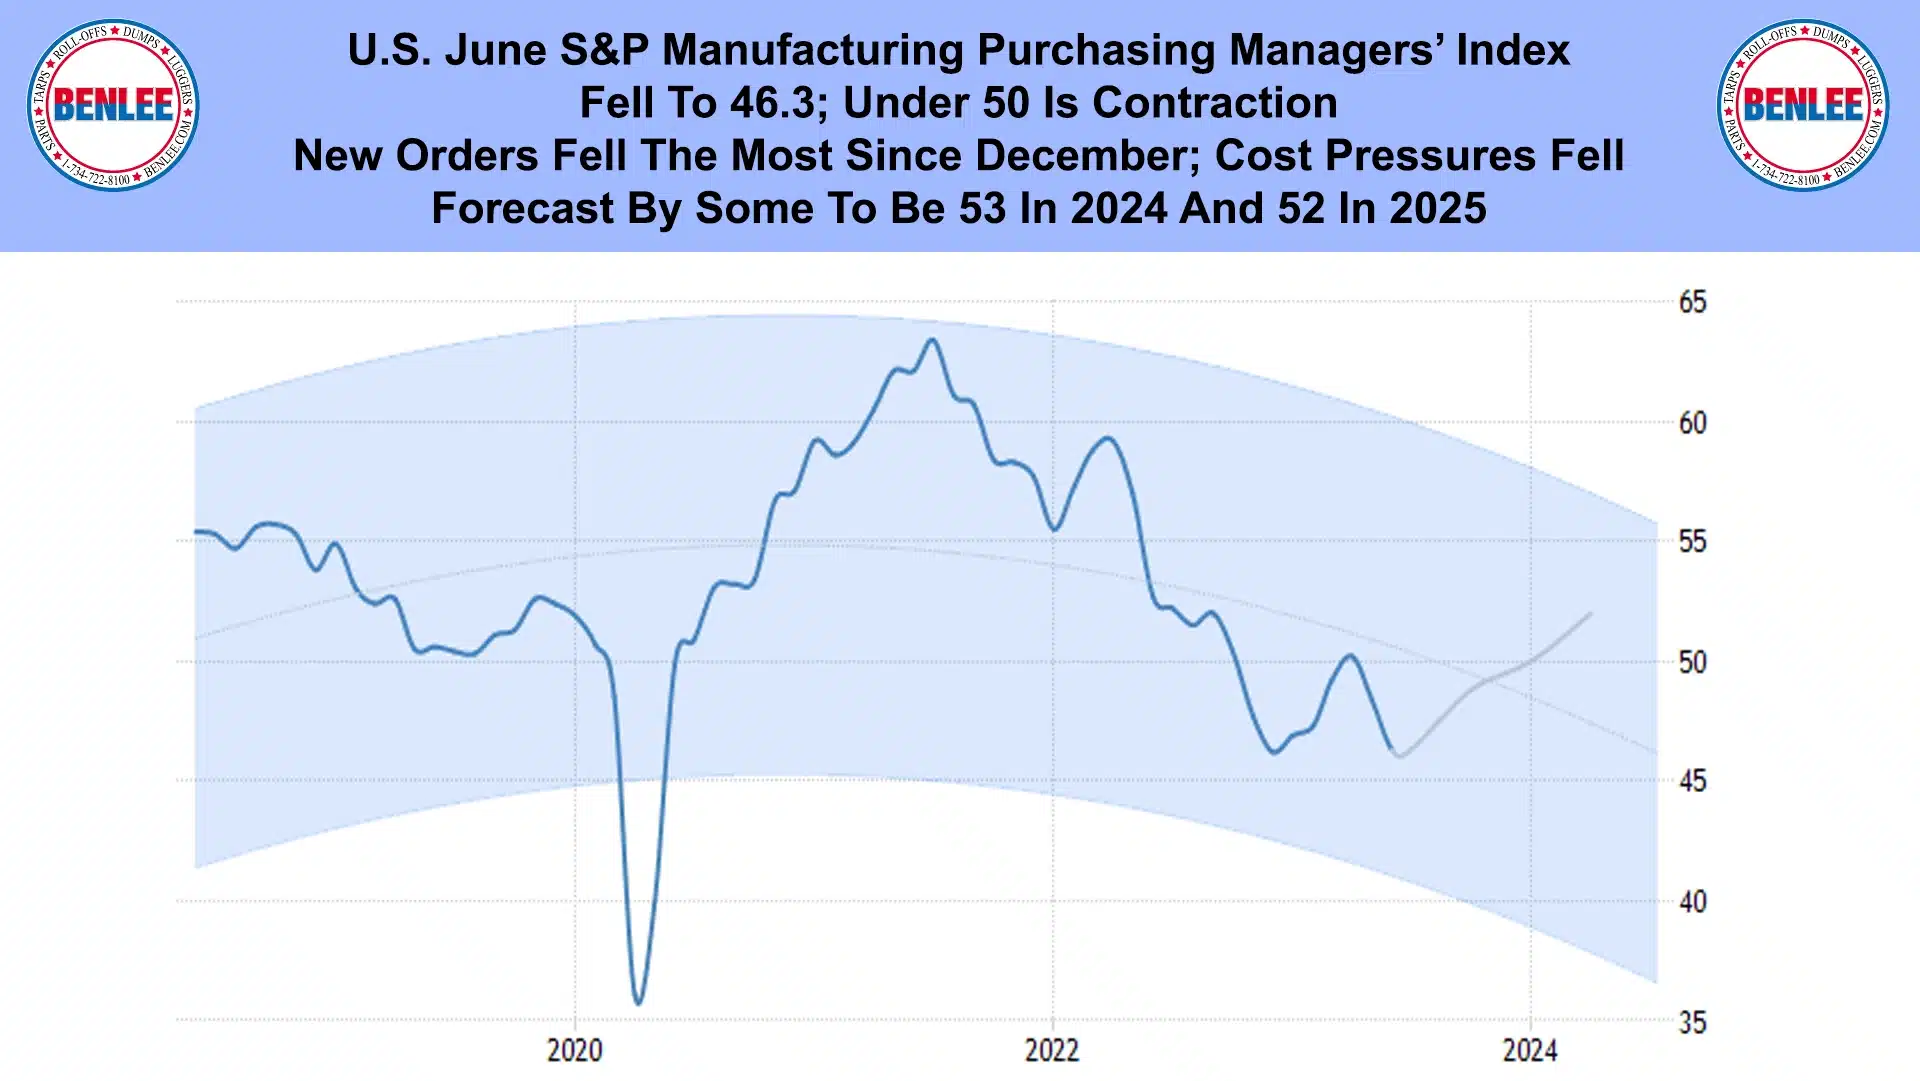 U.S. June S&P Manufacturing Purchasing Managers' Index